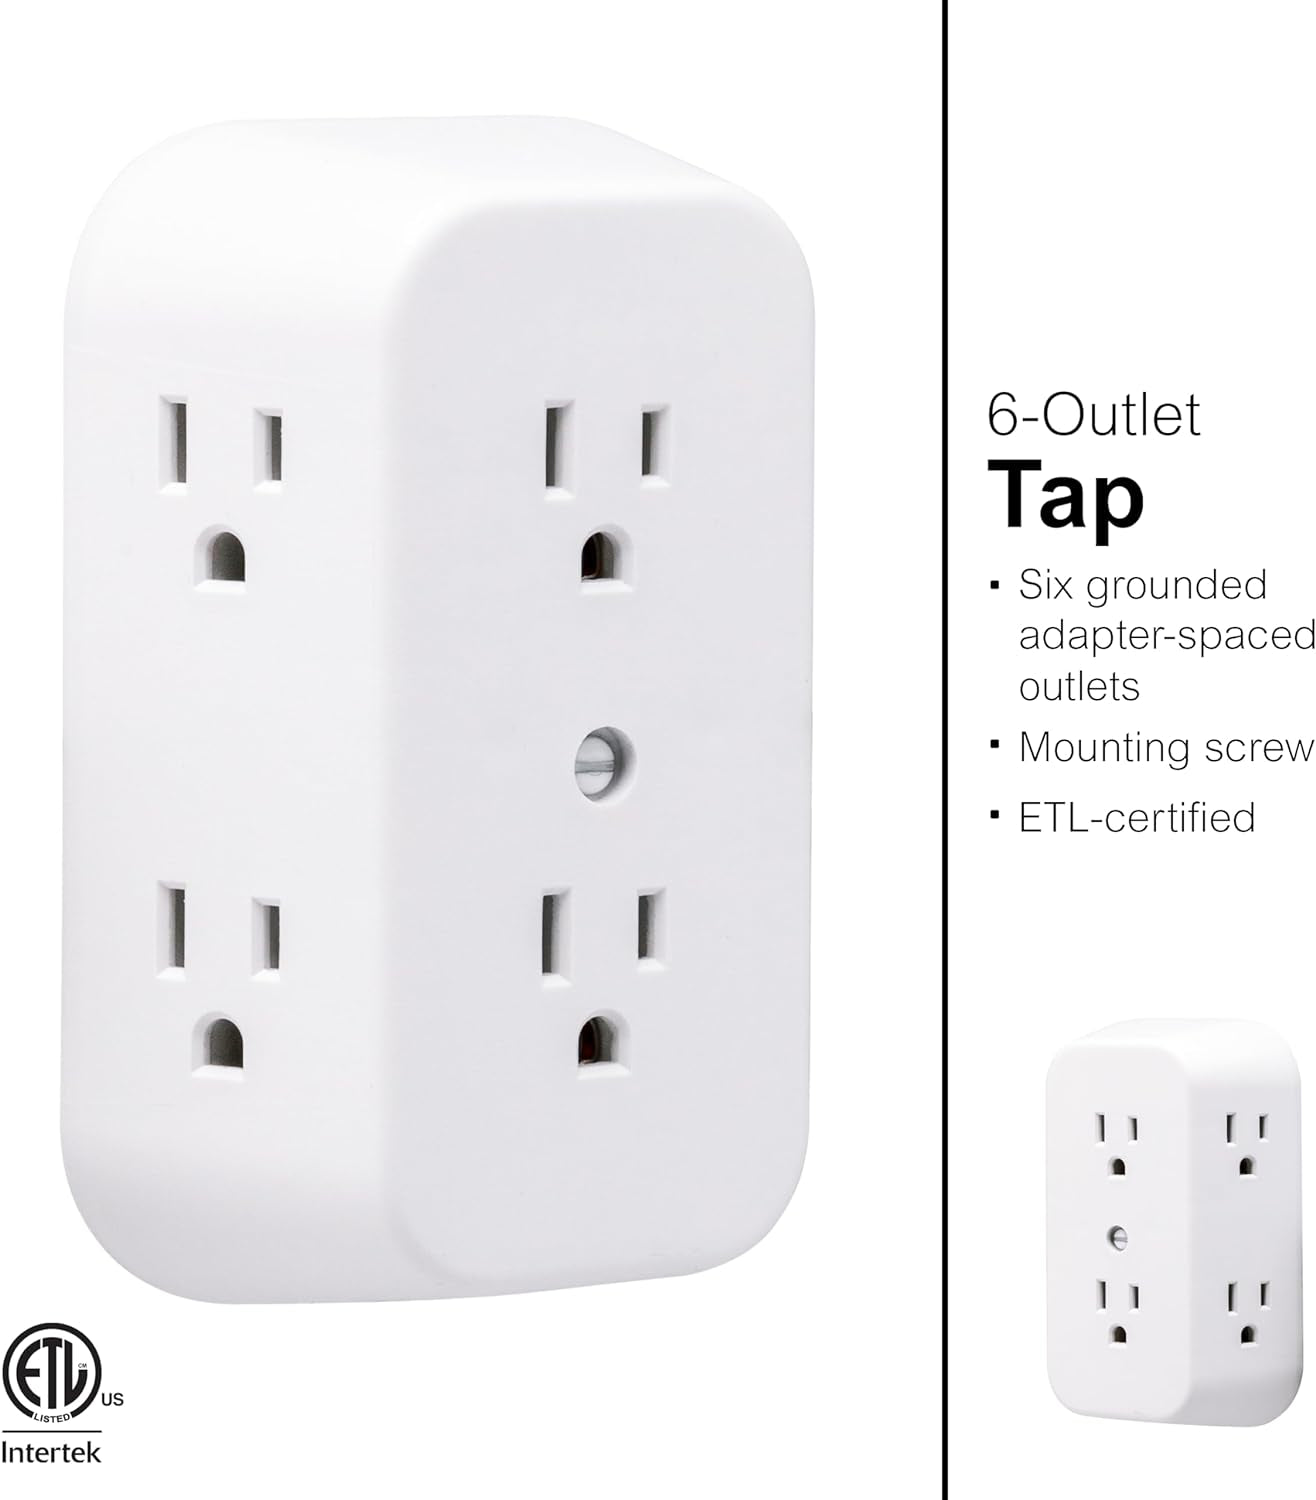 6-Outlet Extender, Grounded Wall Tap, Adapter Spaced Outlets, 3-Prong, Multiple Plug, Quick and Easy Install, Cruise Essentials, UL Listed, White, 50759